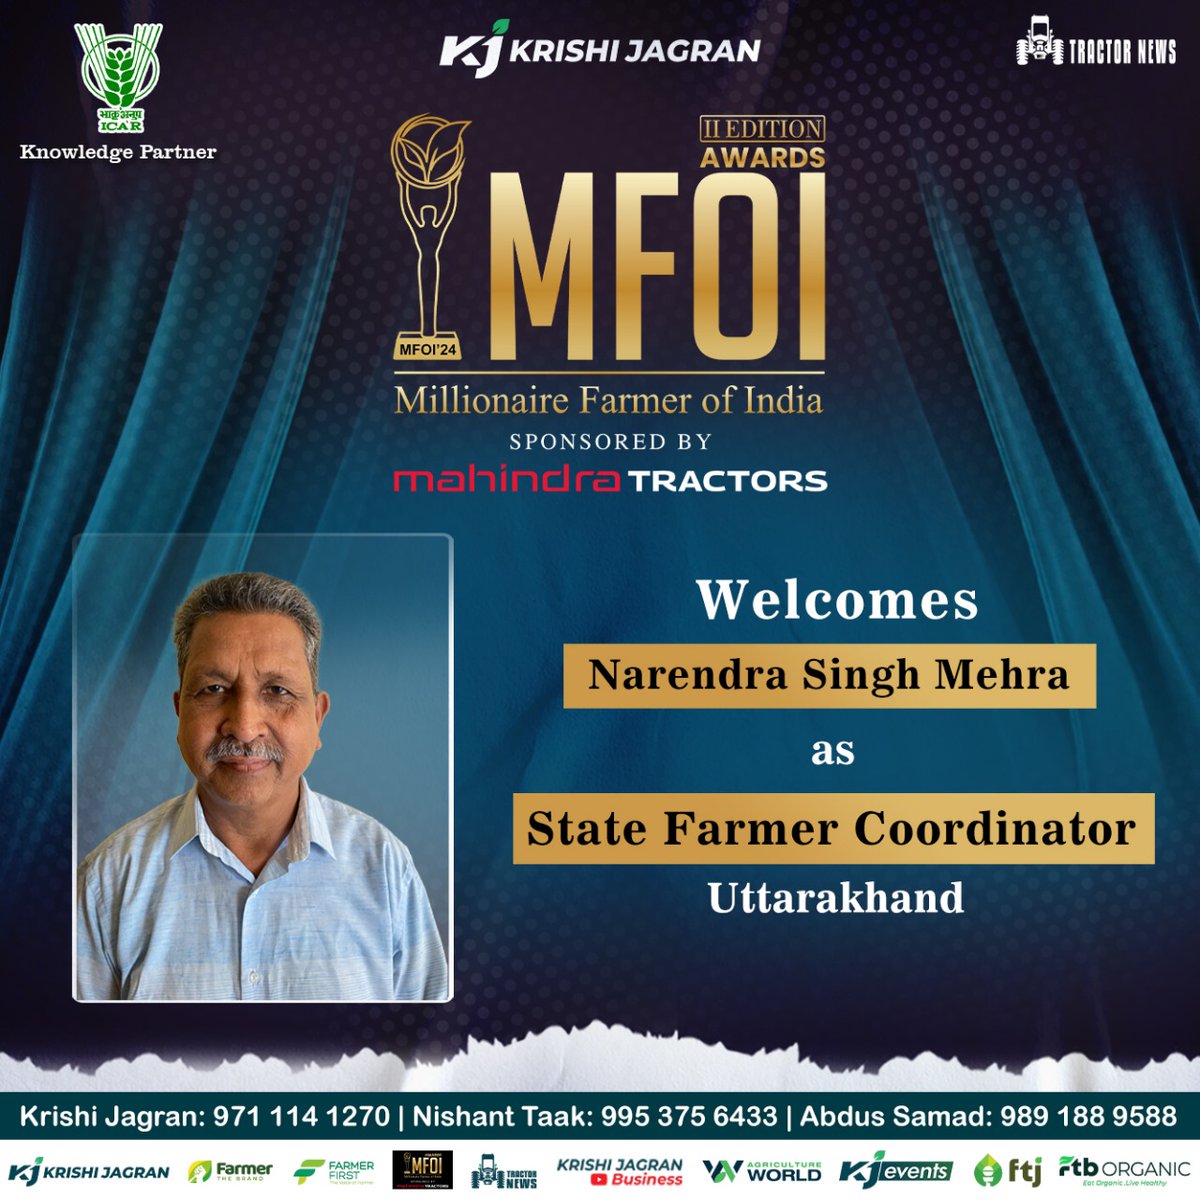 Krishi Jagran is honored to welcome to Mr. Narendra Singh Mehra who will serve as the State Farmer Coordinator for Uttarakhand in the II Edition of the Millionaire Farmer of India, sponsored by Mahindra Tractors. Click on the following link for Registration